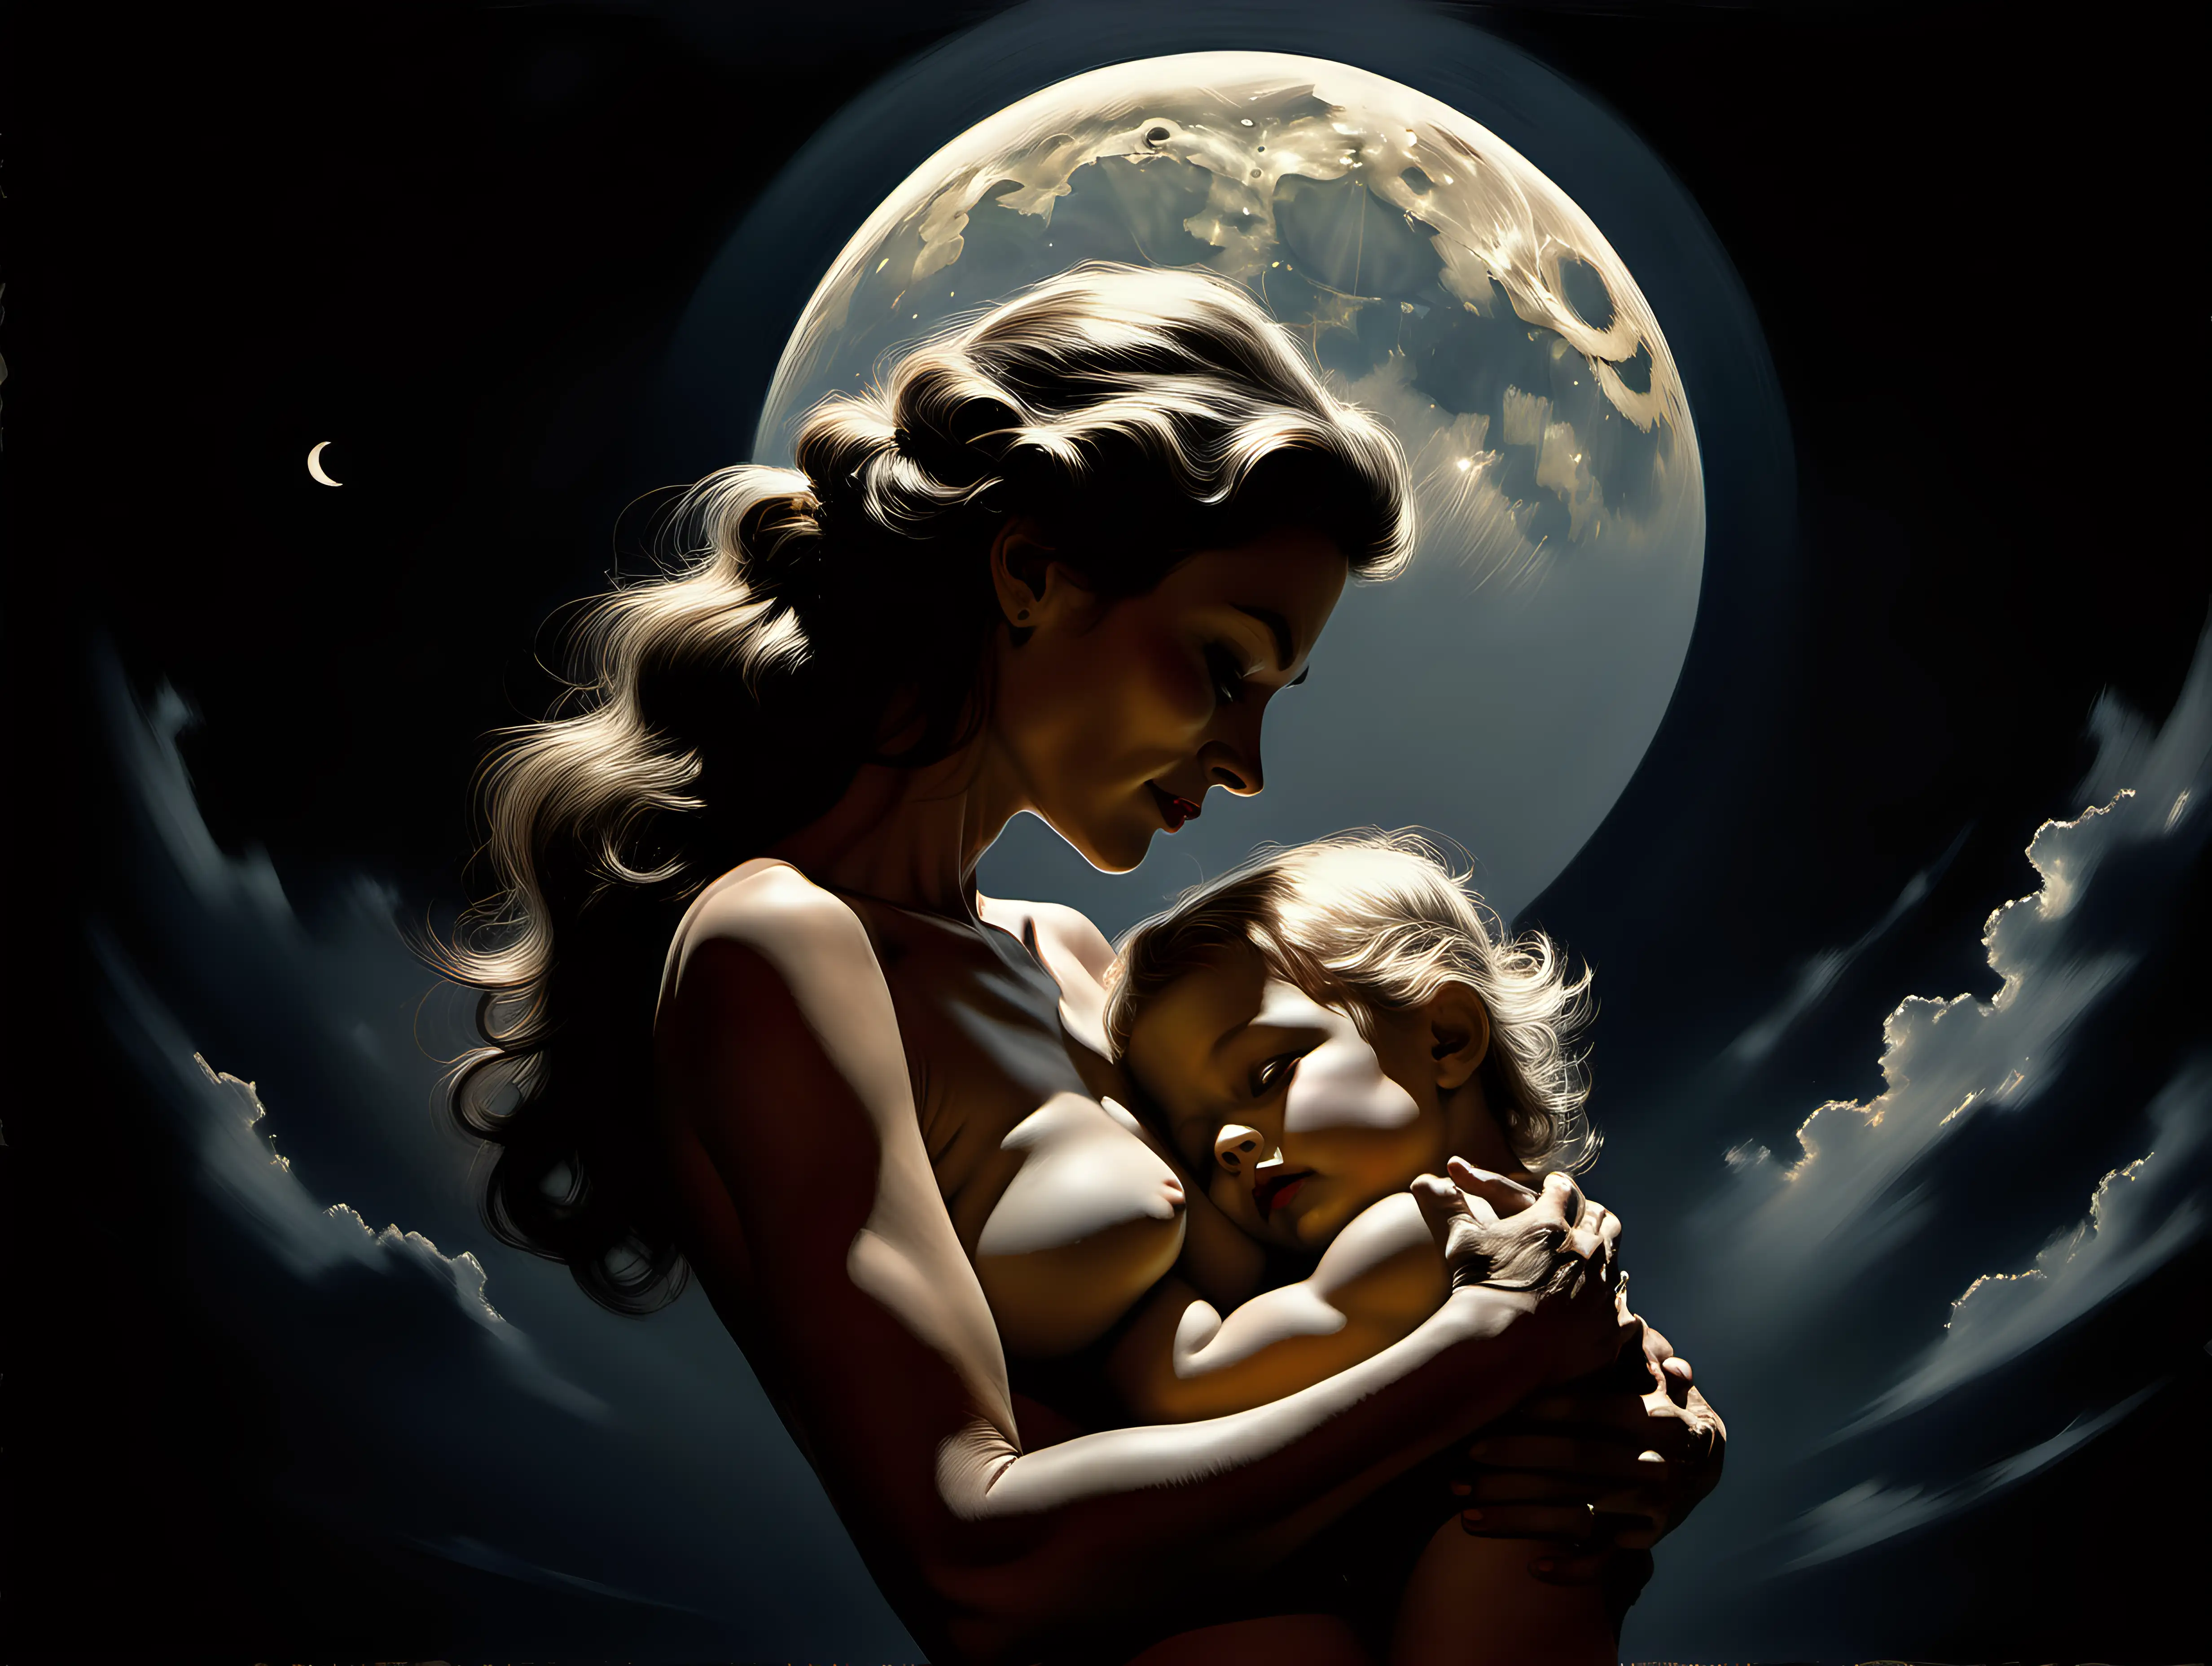 Mother and child holding each other with moon coming in behind them in style of photorealism by frank frazetta, photograph, high detail, elegant, close up and dark background